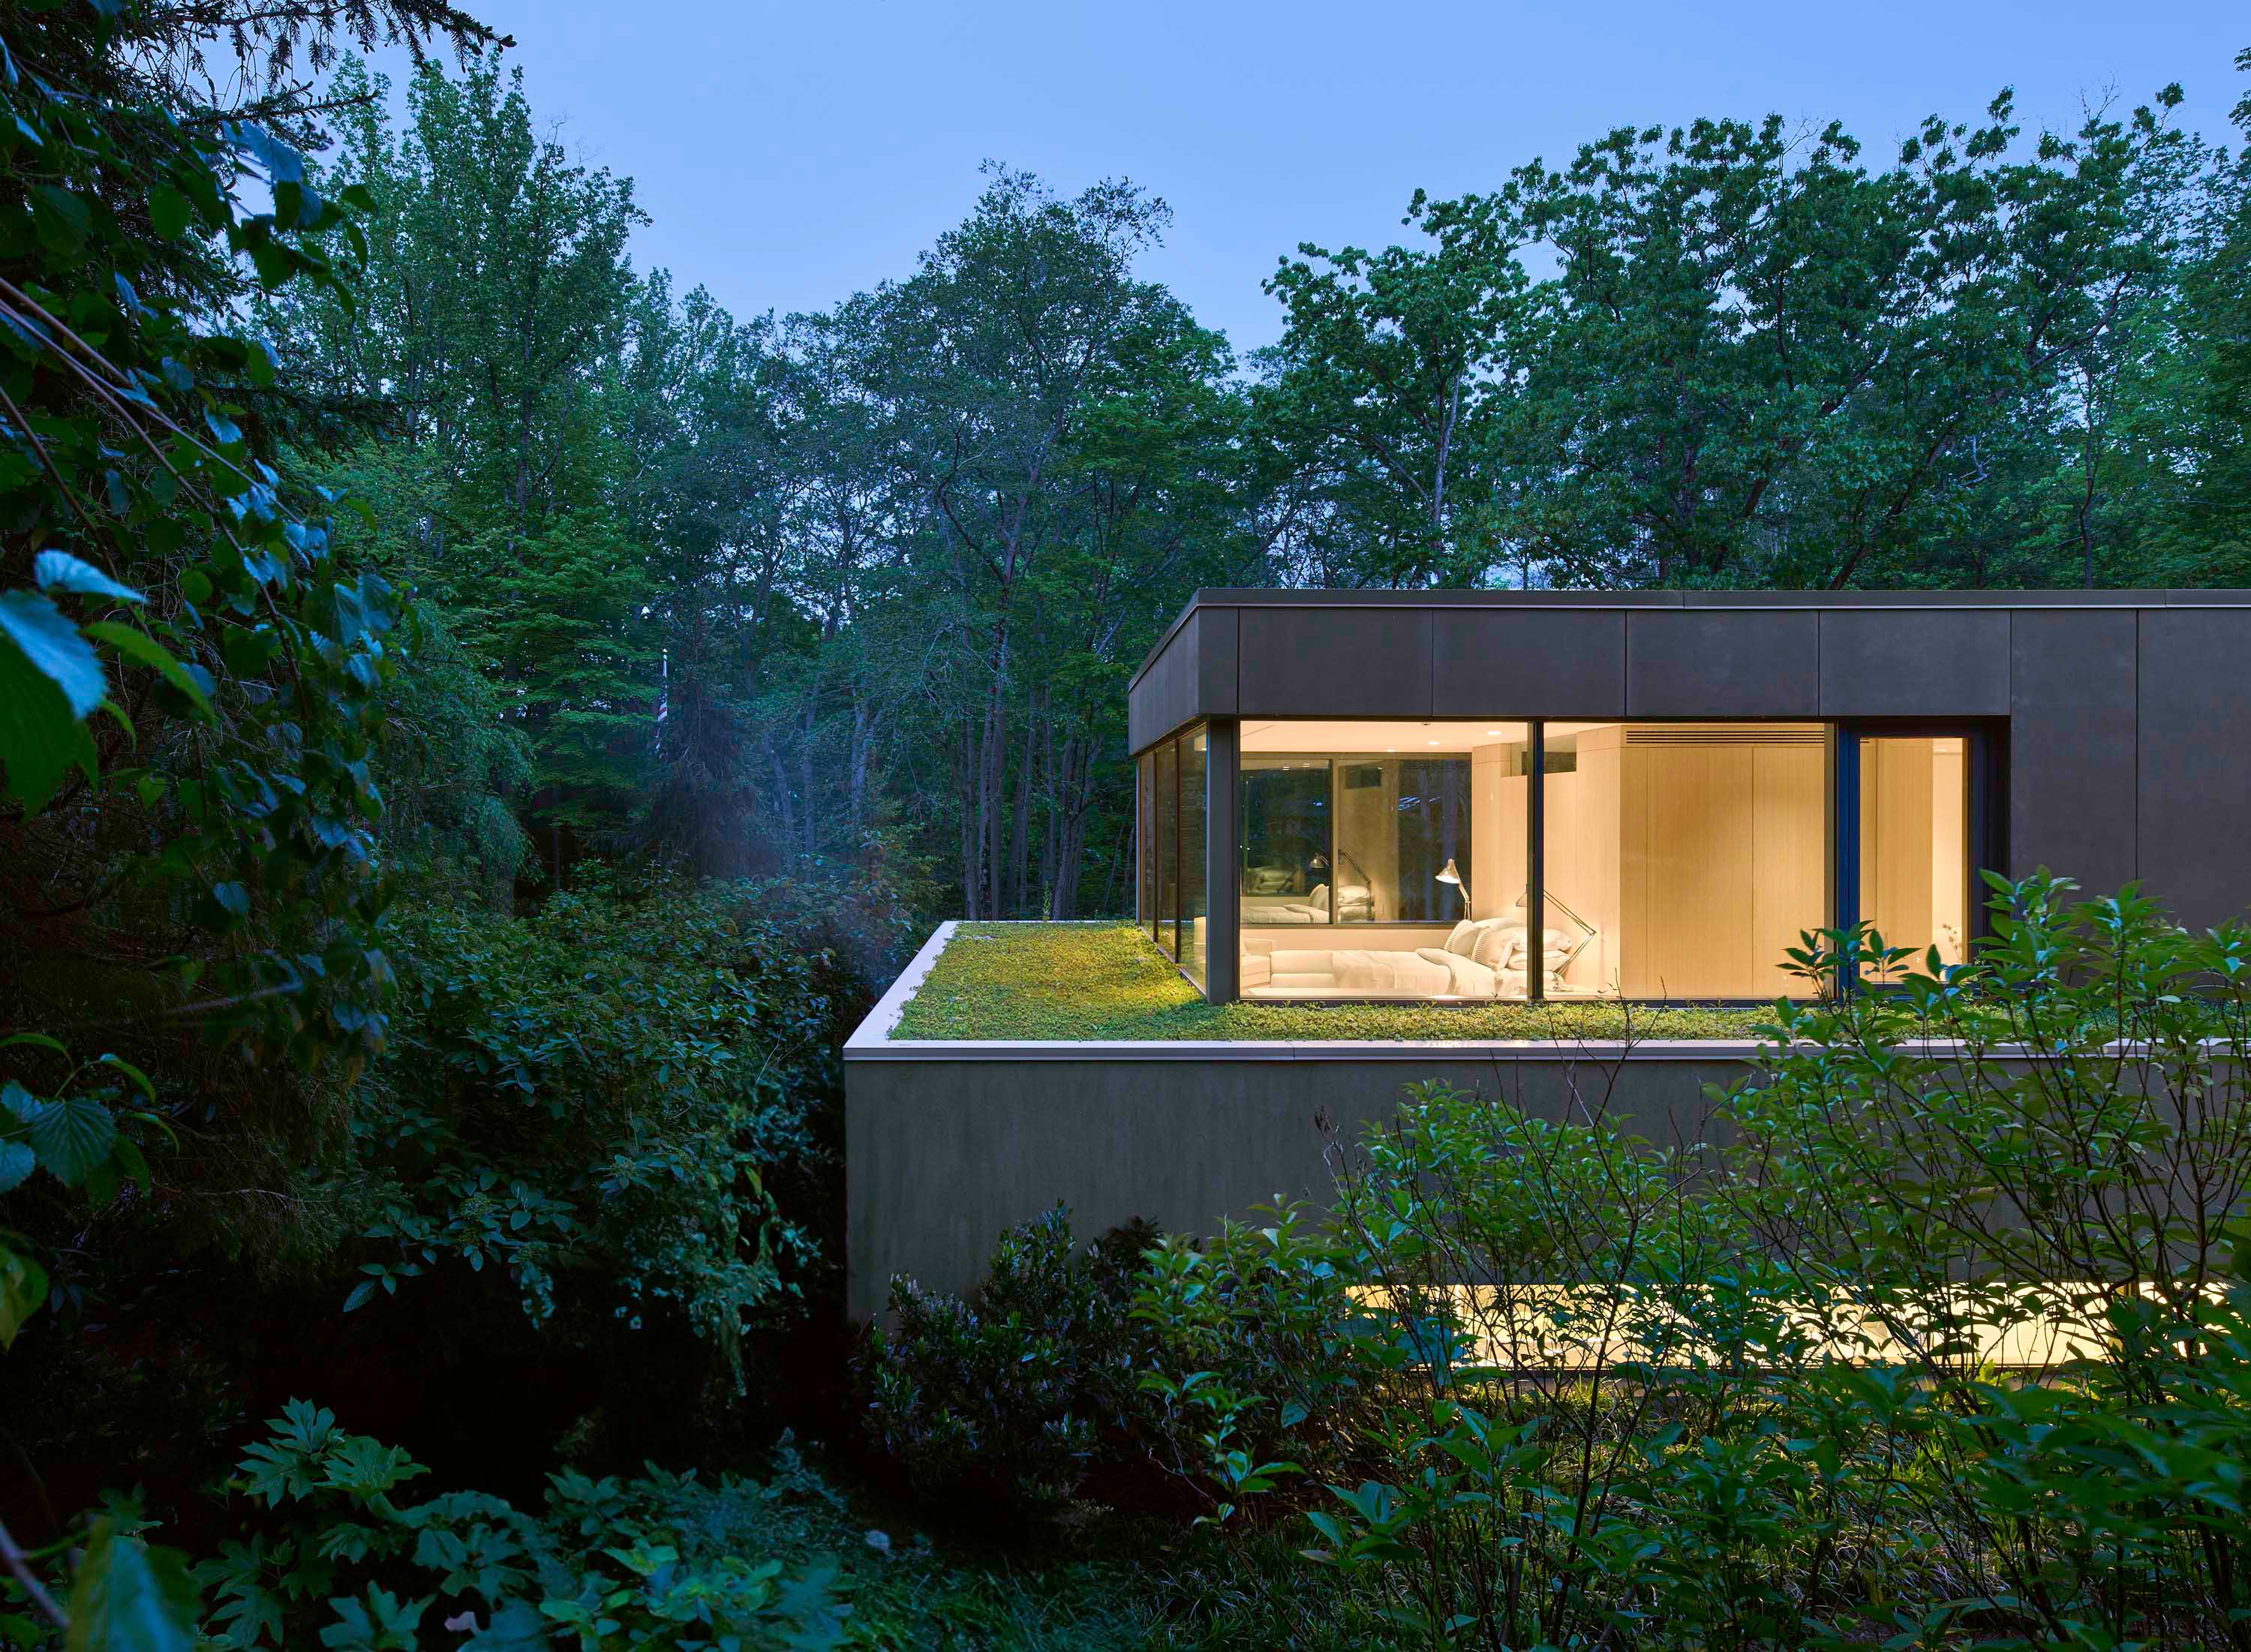 Exterior photo of Weston Residence by Specht Novak Architects. Shot by Jasper Lazor, featuring the main bedroom in a corner of the home with glass walls that open the view to the surrounding nature.